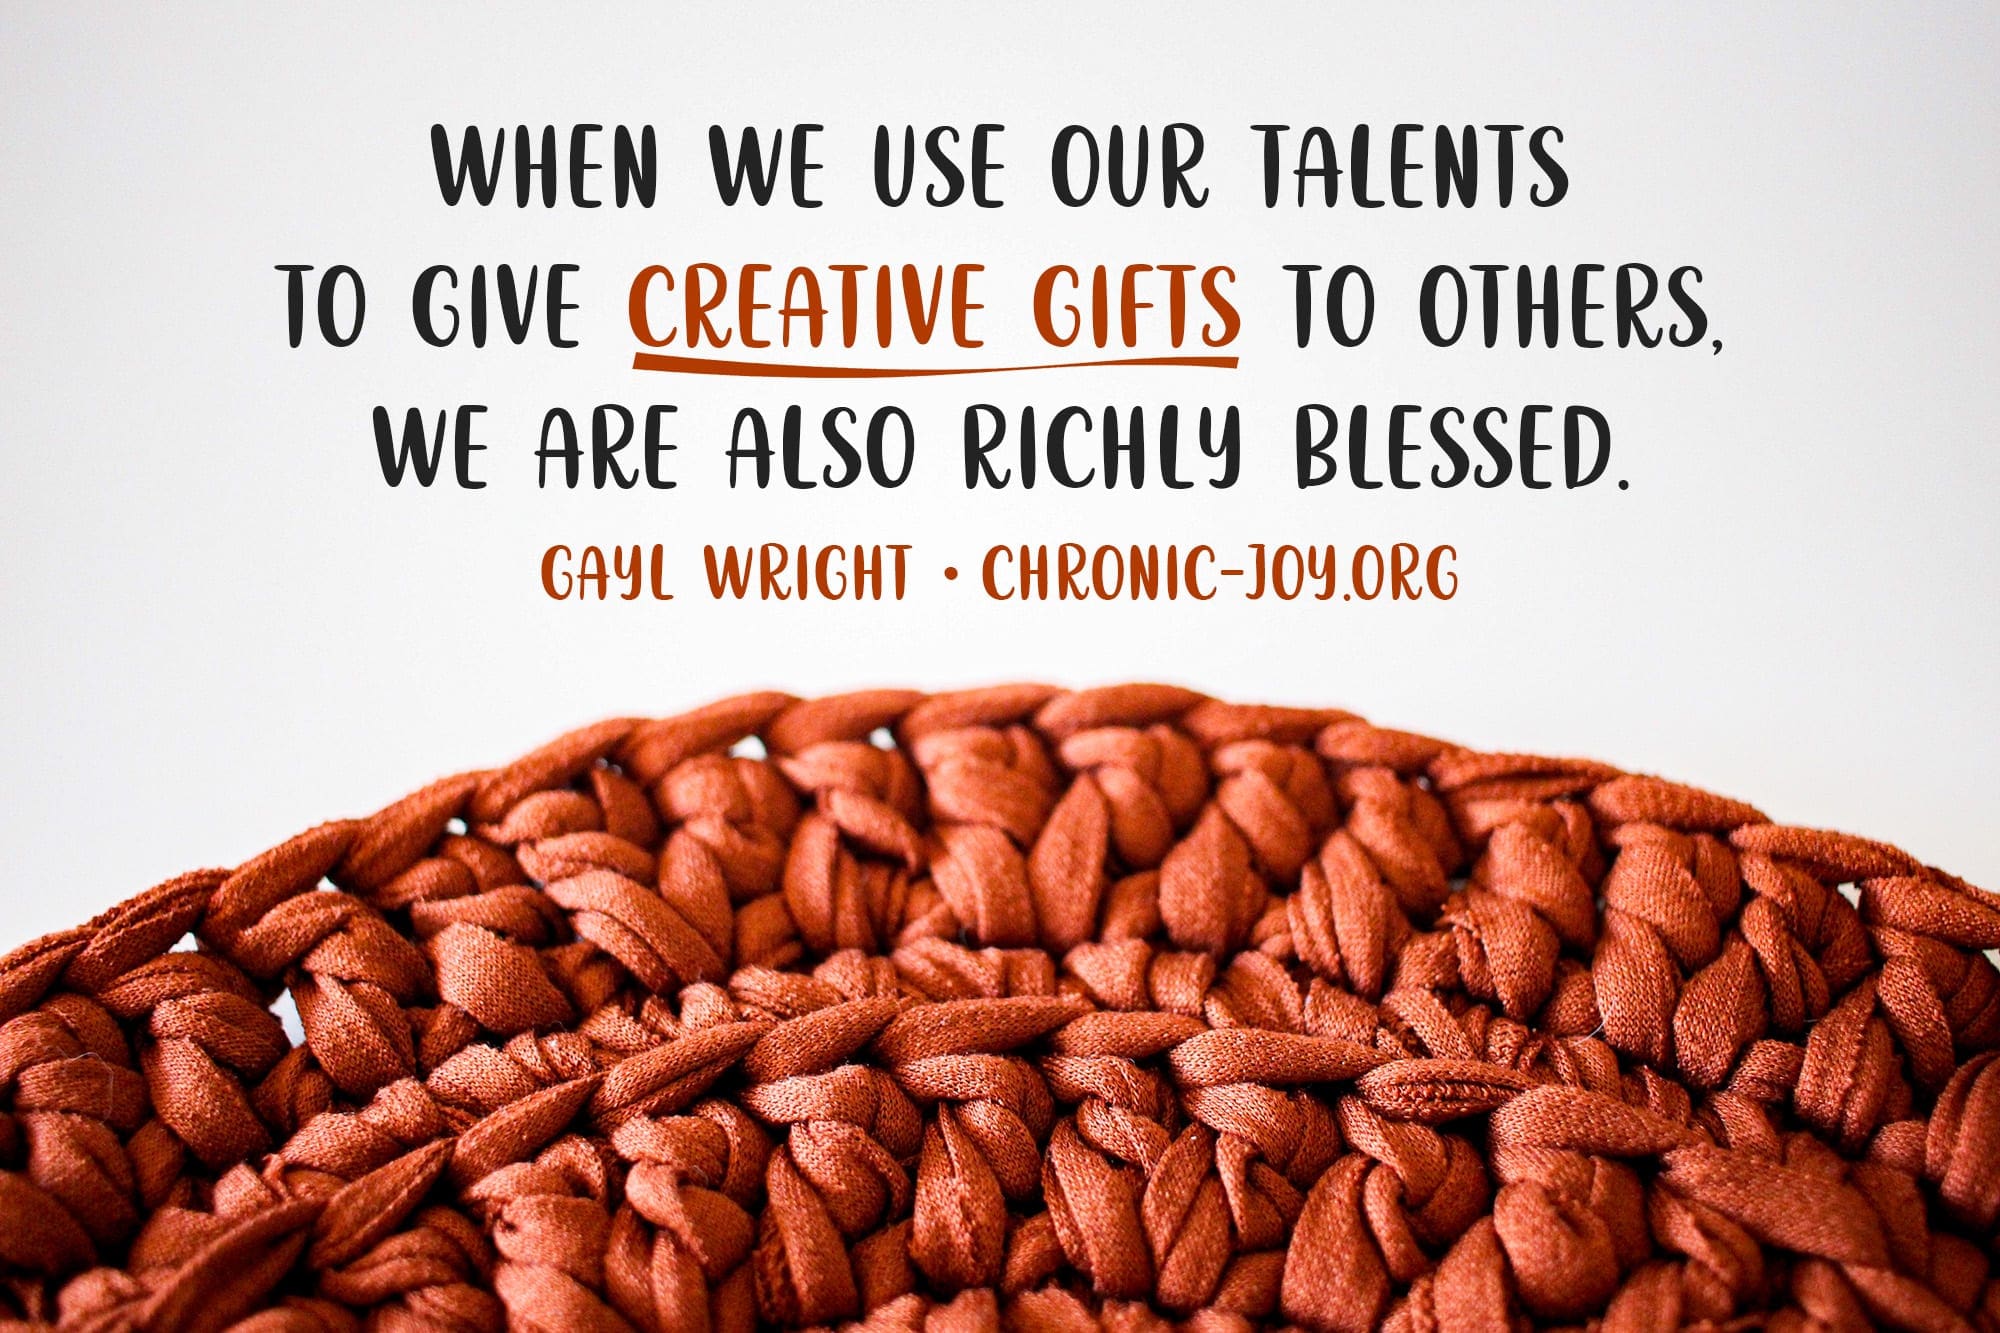 "When we use our talents to give creative gifts to others, we are also richly blessed." Gayl Wright